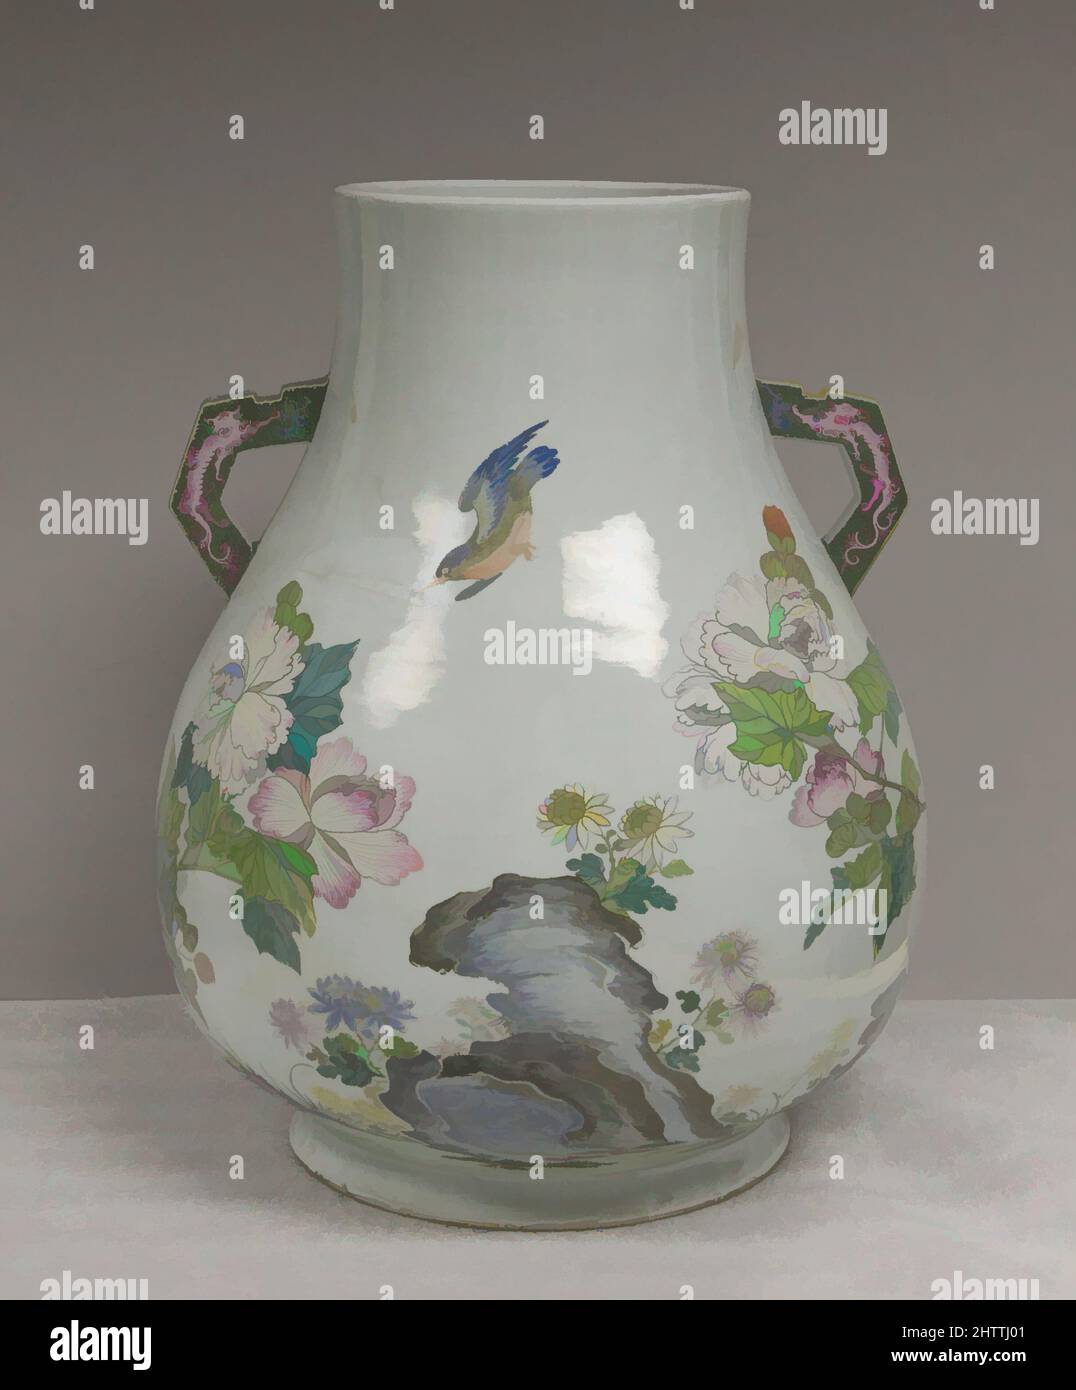 Art inspired by Vase, Qing dynasty (1644–1911), Yongzheng period (1723–35), China, Porcelain, H. 19 in. (48.3 cm); W. 14 1/2 in. (36.8 cm); Diam. of rim: 7 3/4 in. (19.7 cm); Diam. of foot: 9 7/8 in. (25.1 cm), Ceramics, Classic works modernized by Artotop with a splash of modernity. Shapes, color and value, eye-catching visual impact on art. Emotions through freedom of artworks in a contemporary way. A timeless message pursuing a wildly creative new direction. Artists turning to the digital medium and creating the Artotop NFT Stock Photo